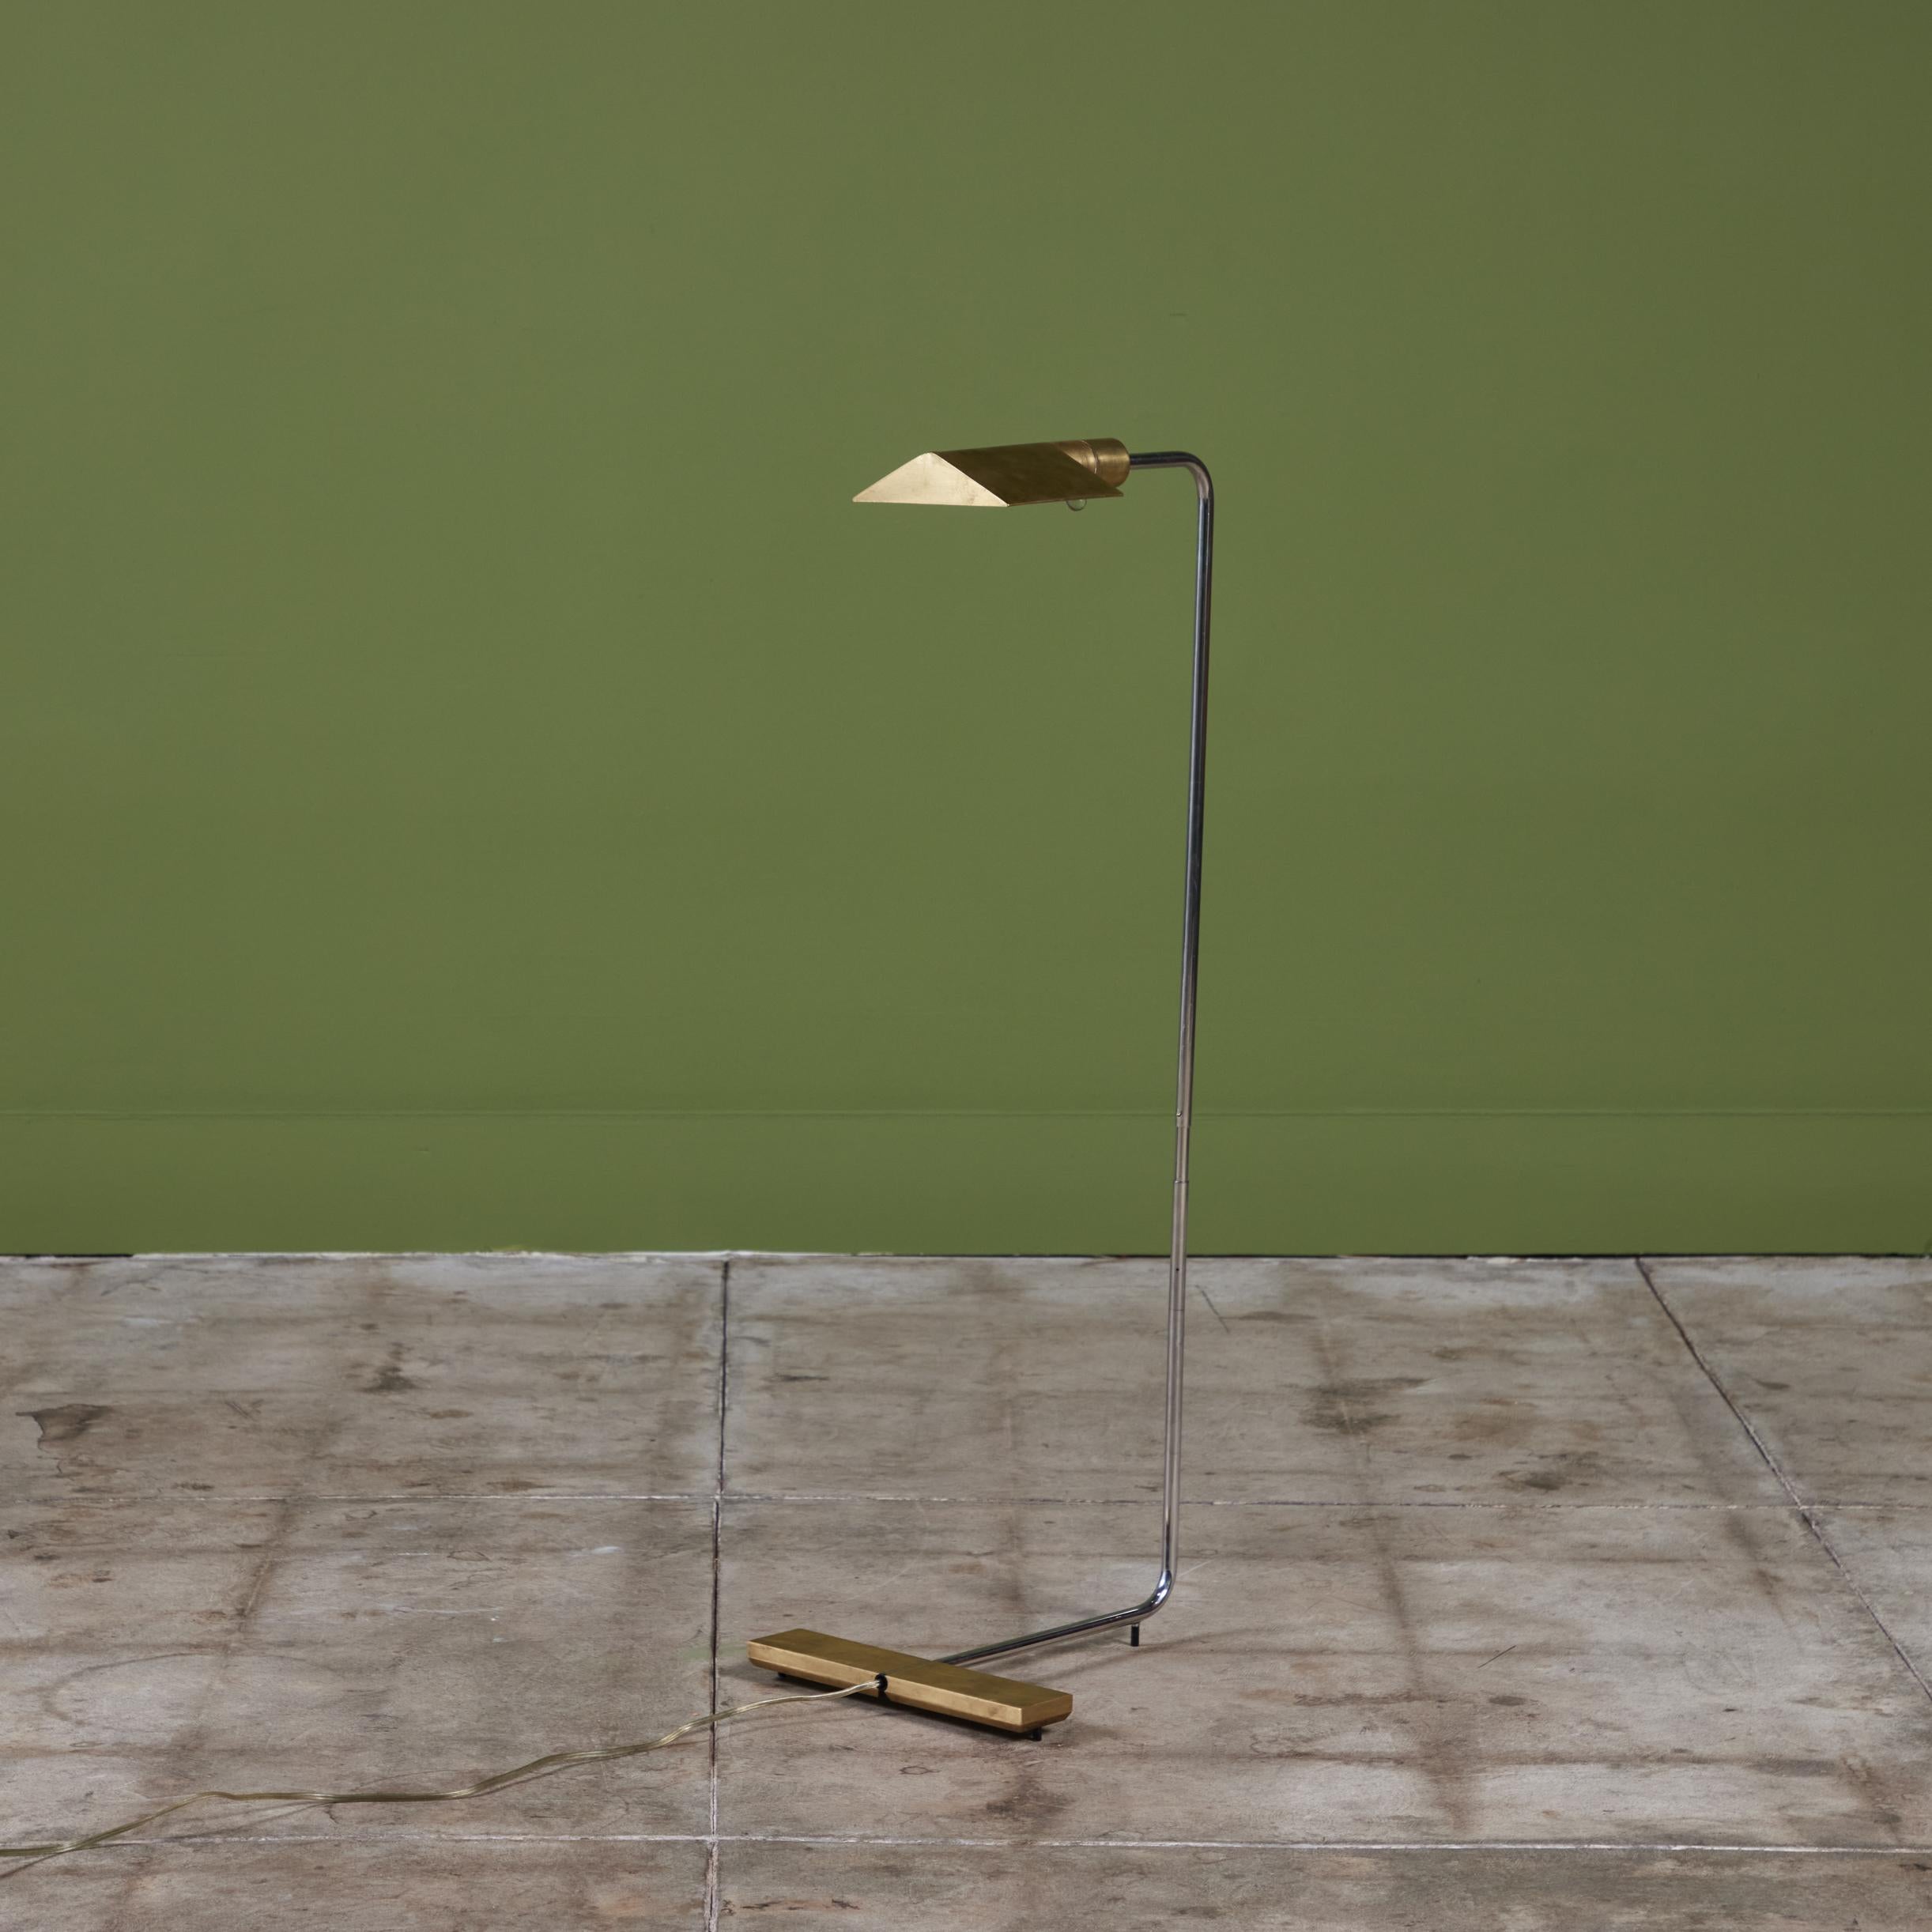 Designed in the 1970s, this brass and stainless steel floor lamp by Cedric Hartman is an enduring design classic. The modernist floor lamp features a triangular brass shade attached to a curved stainless steel stem that offer focused task lighting.